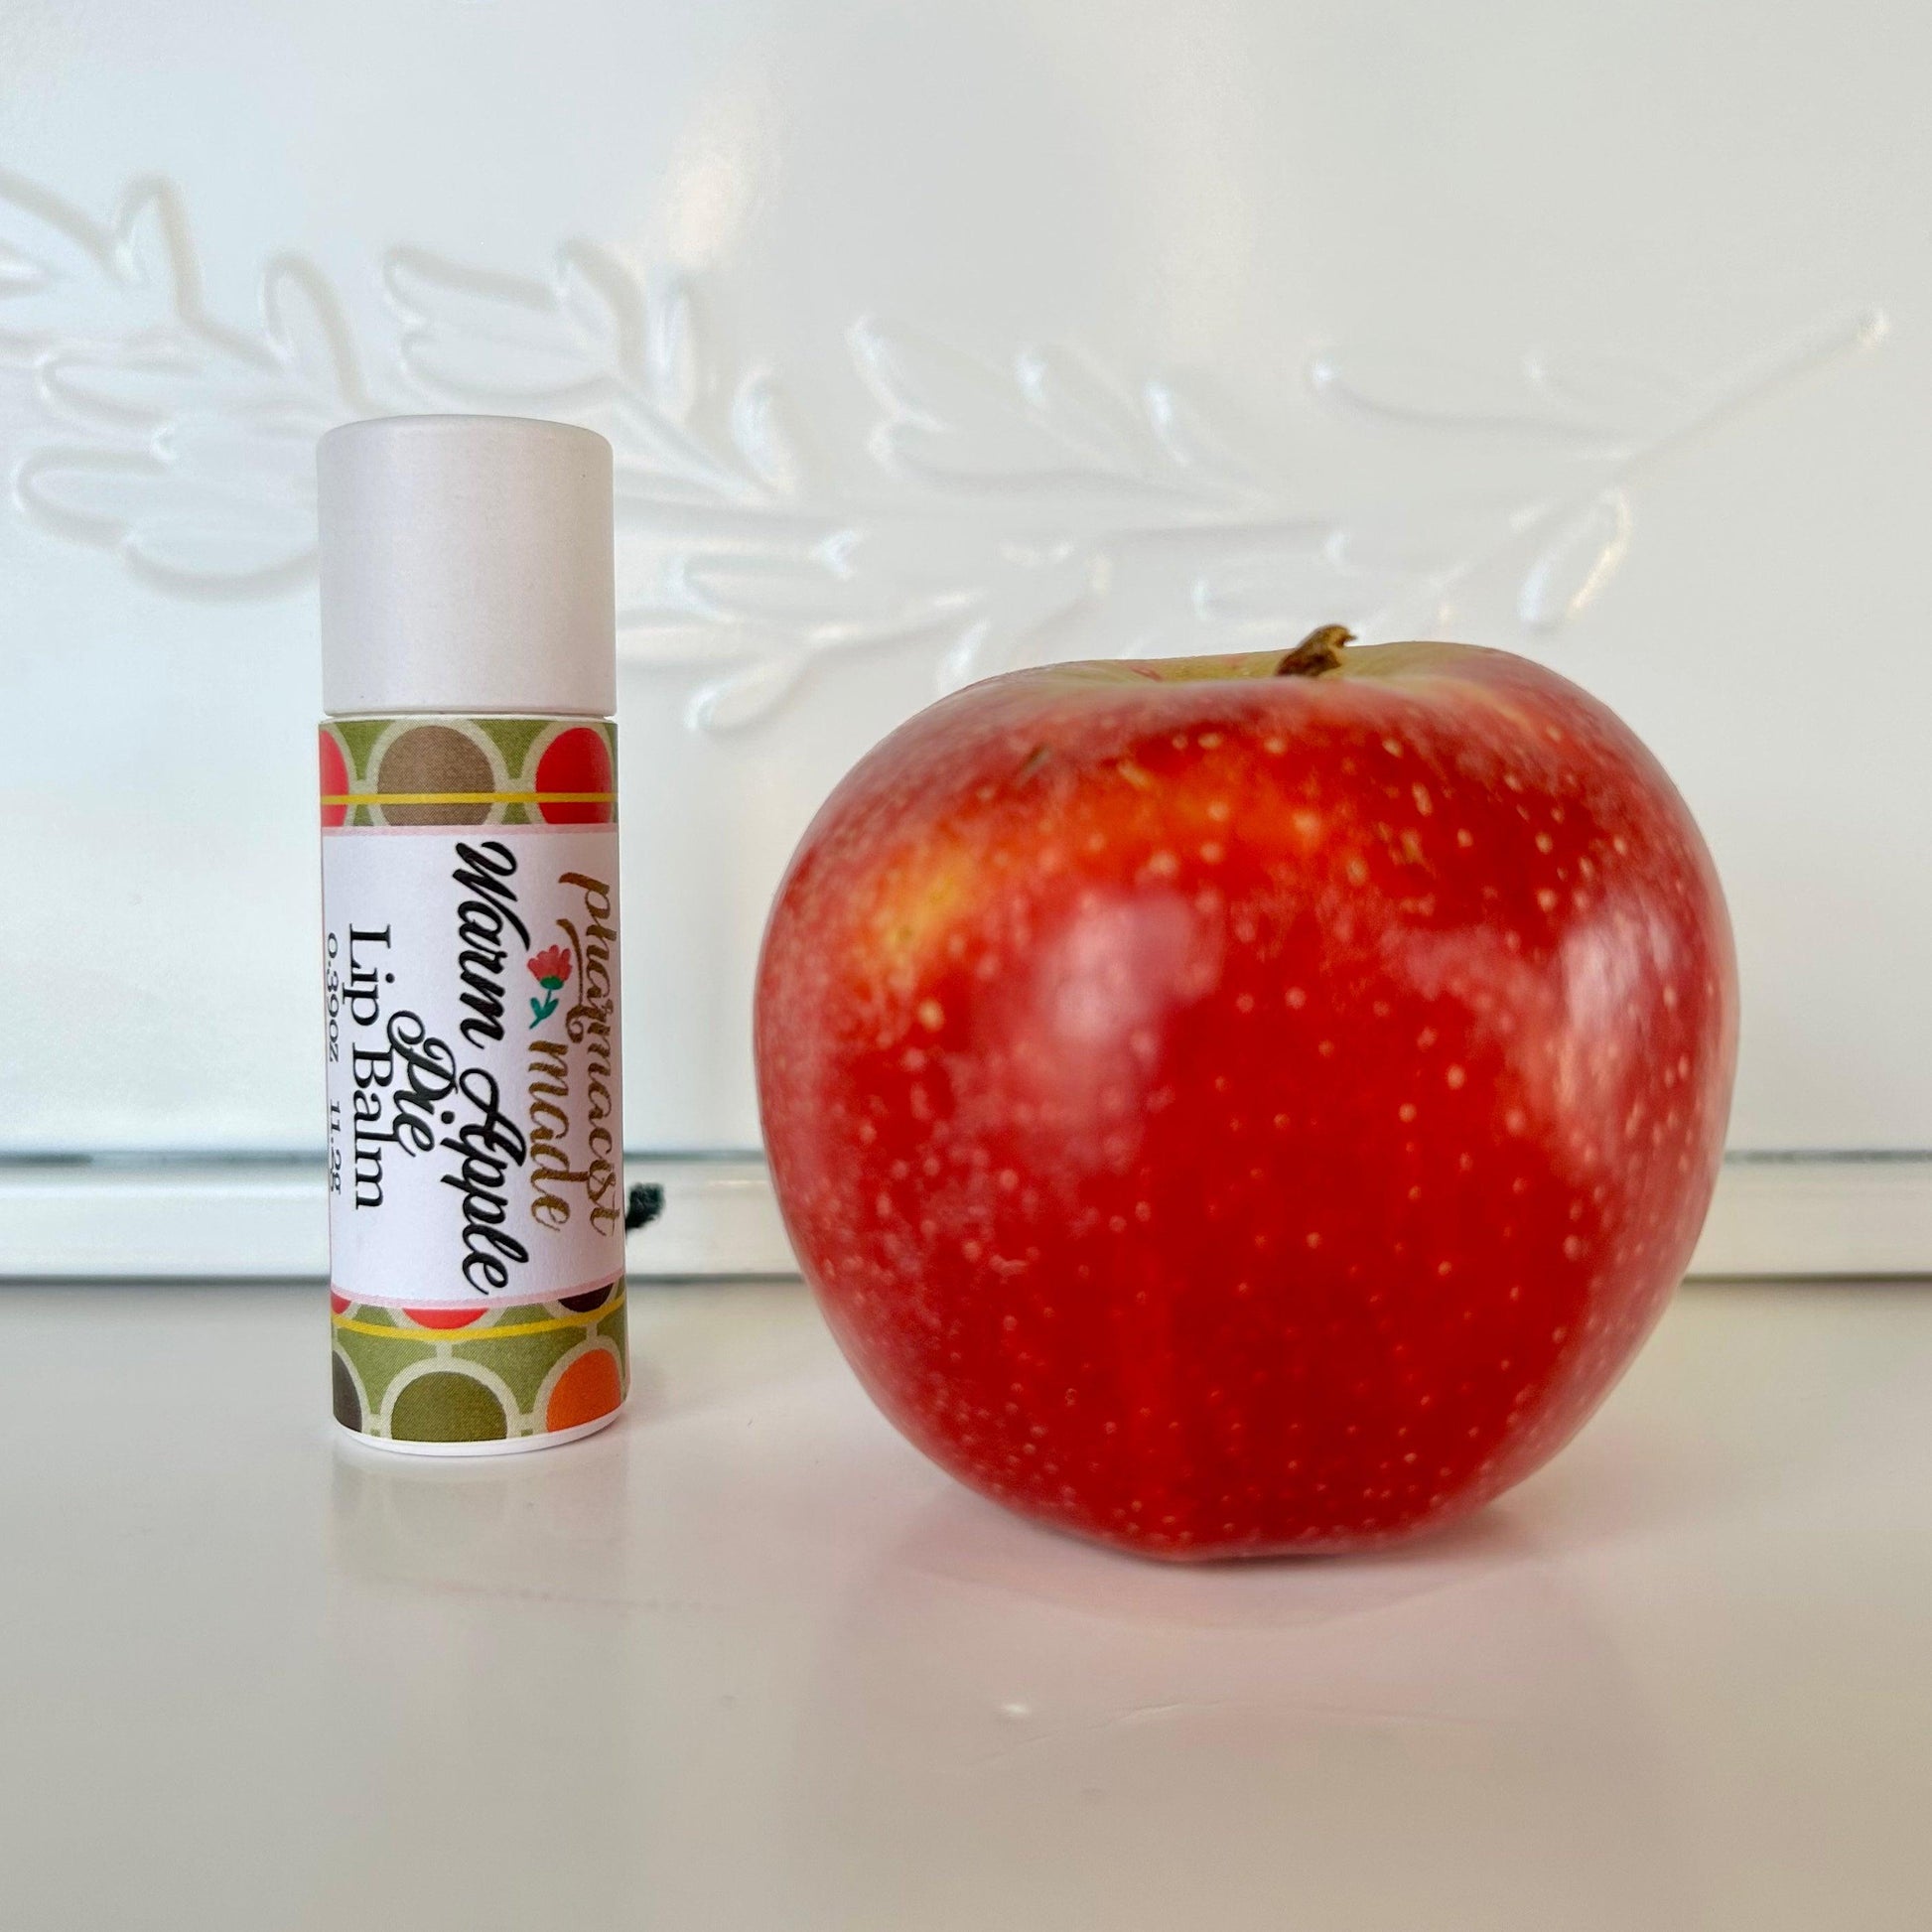 Large Lip Balm in an eco paper tube - Pharmacist Made